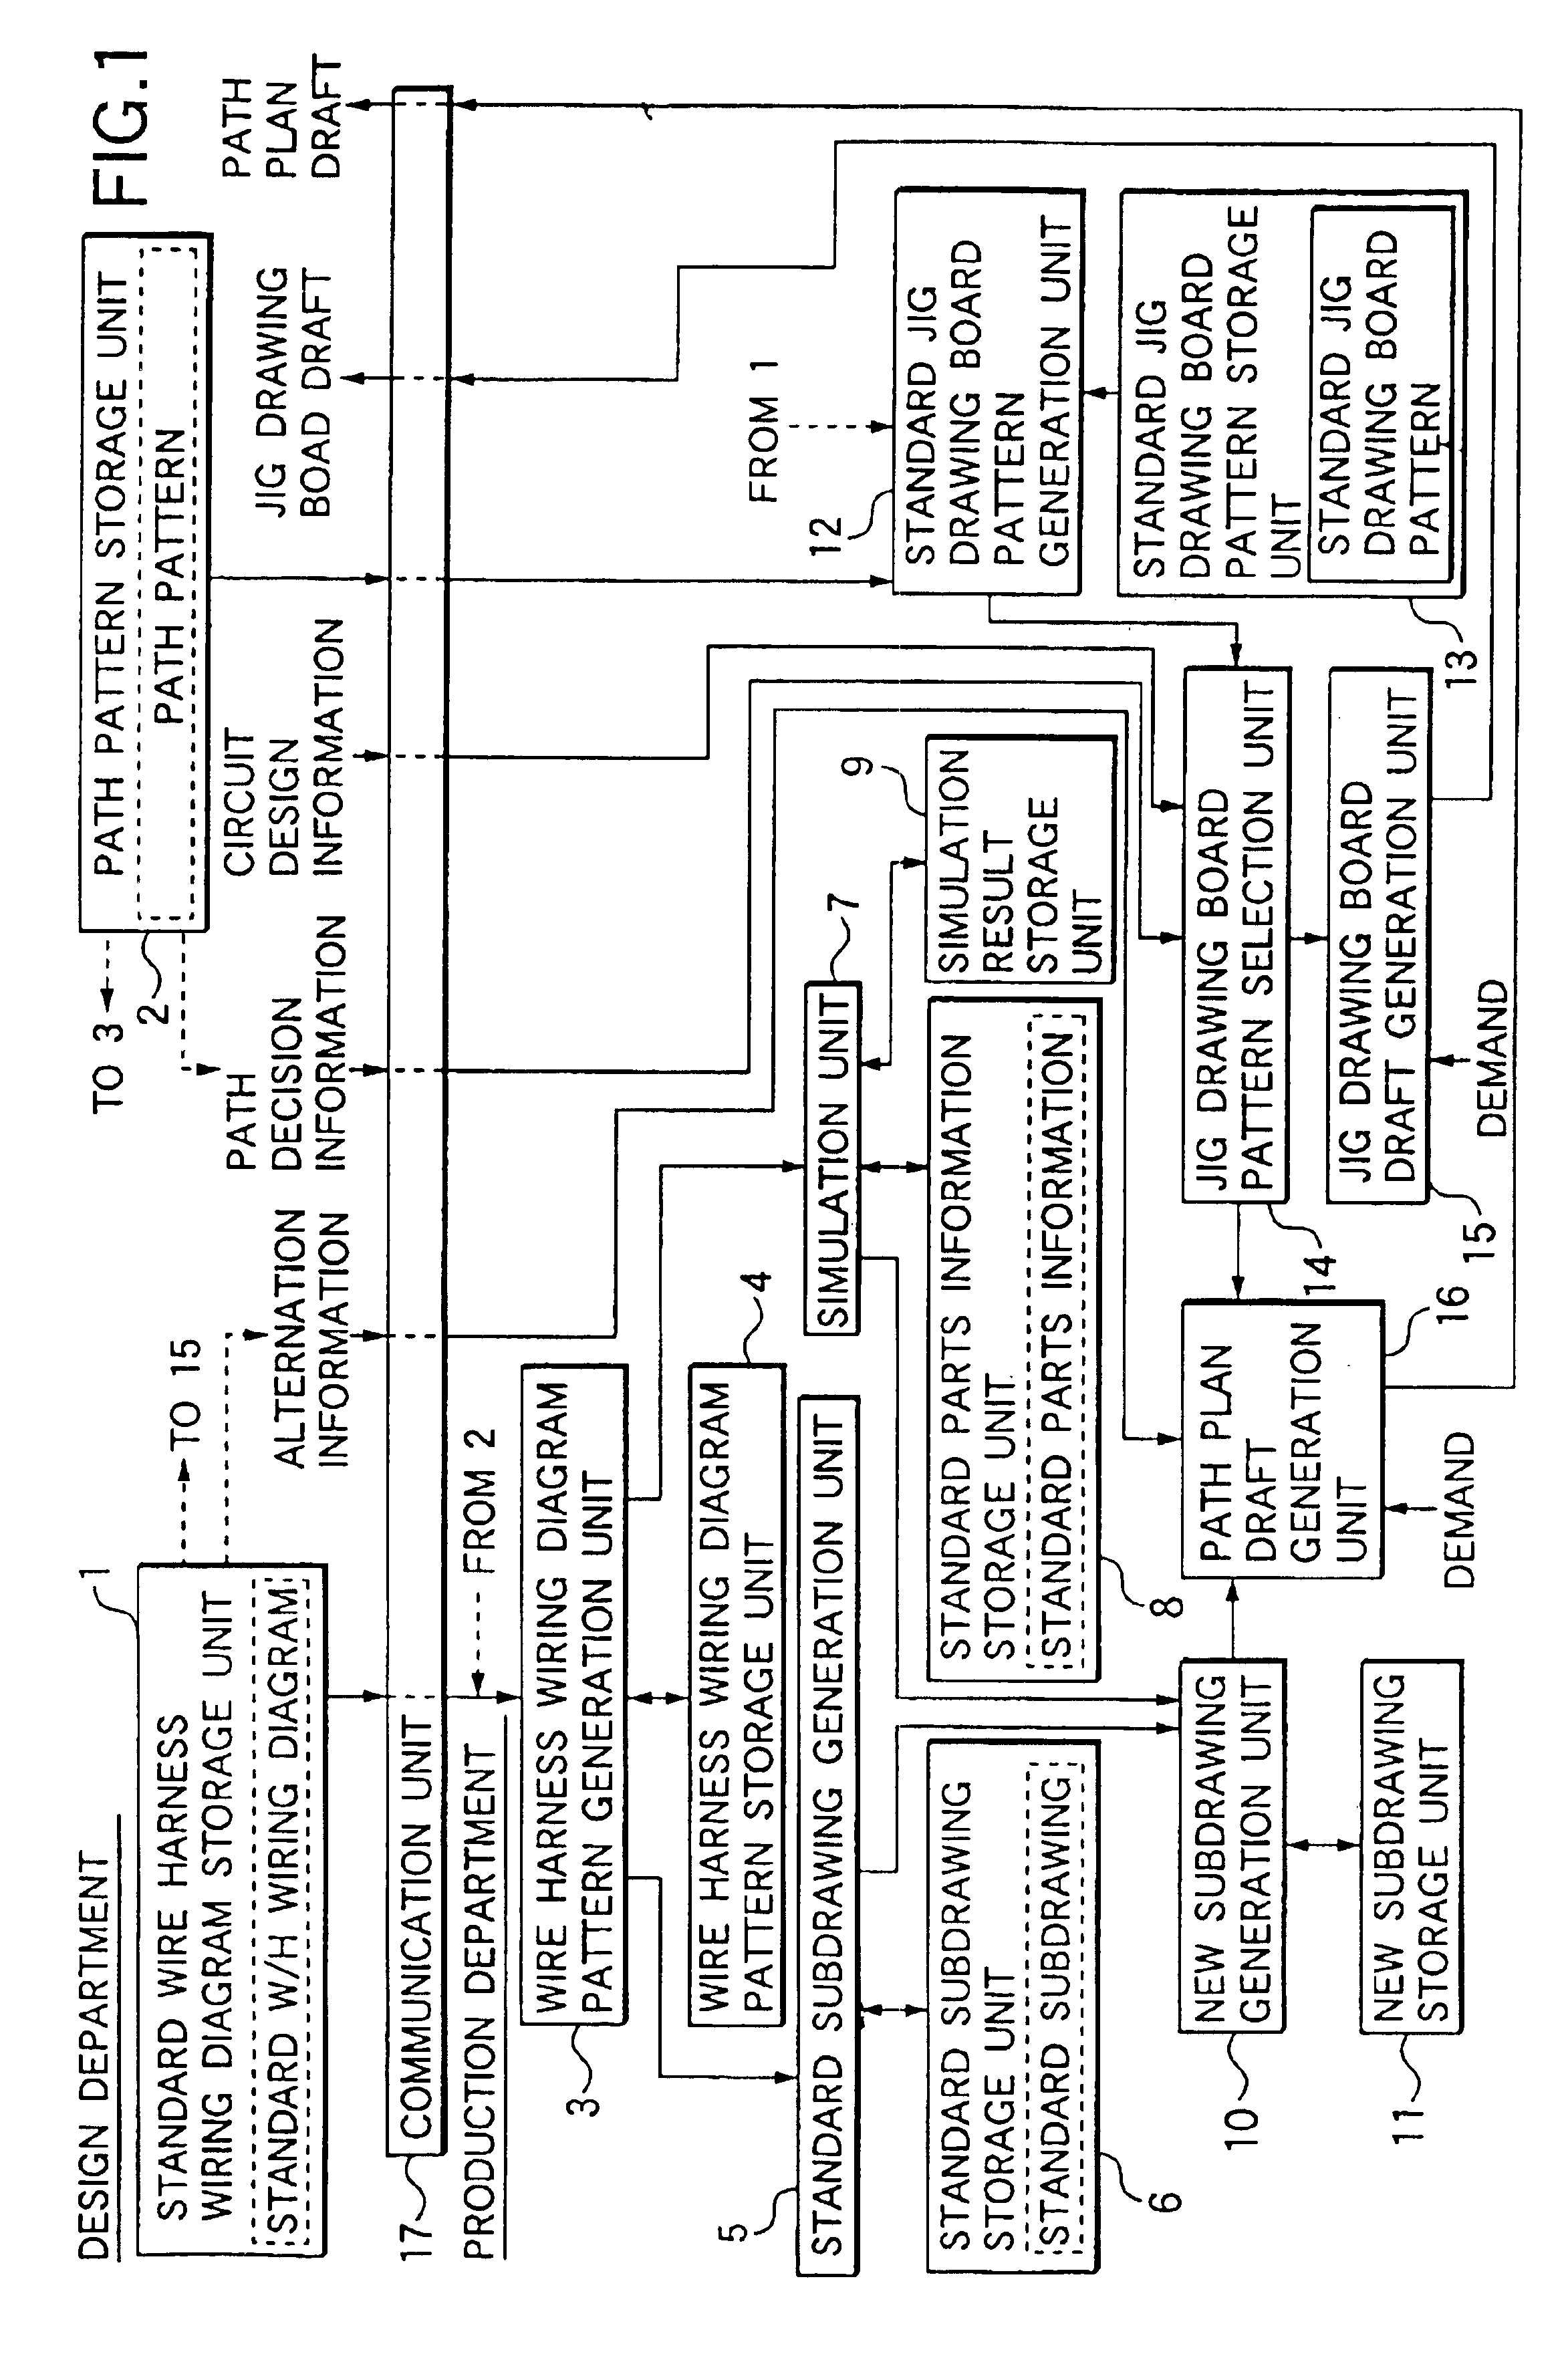 System for preparing wire harness production